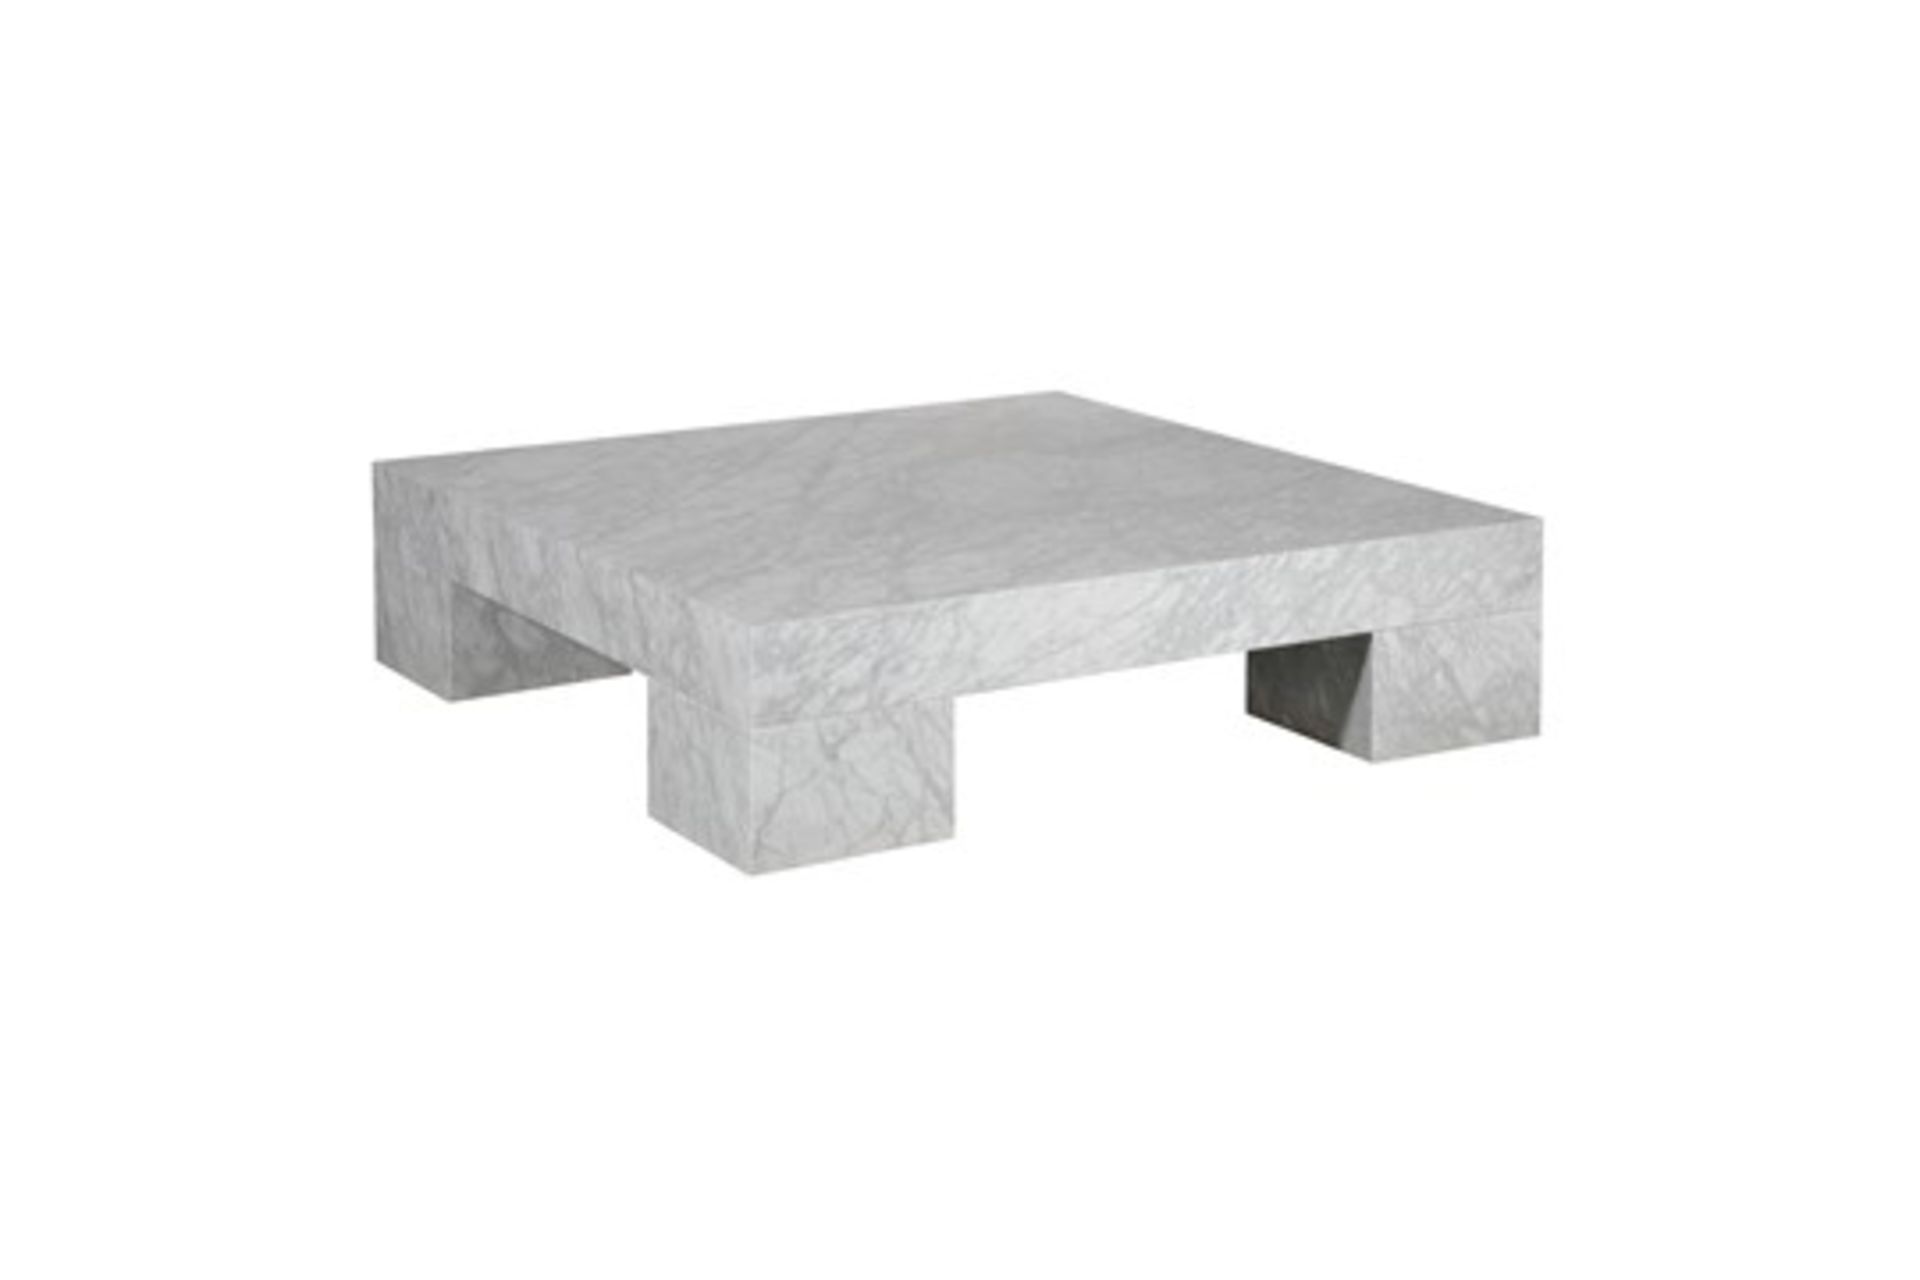 RH Modern Big Foot Coffee Table Polished White Marble 203 x 127 x 38cm RRP £1035 ( Location A7 -